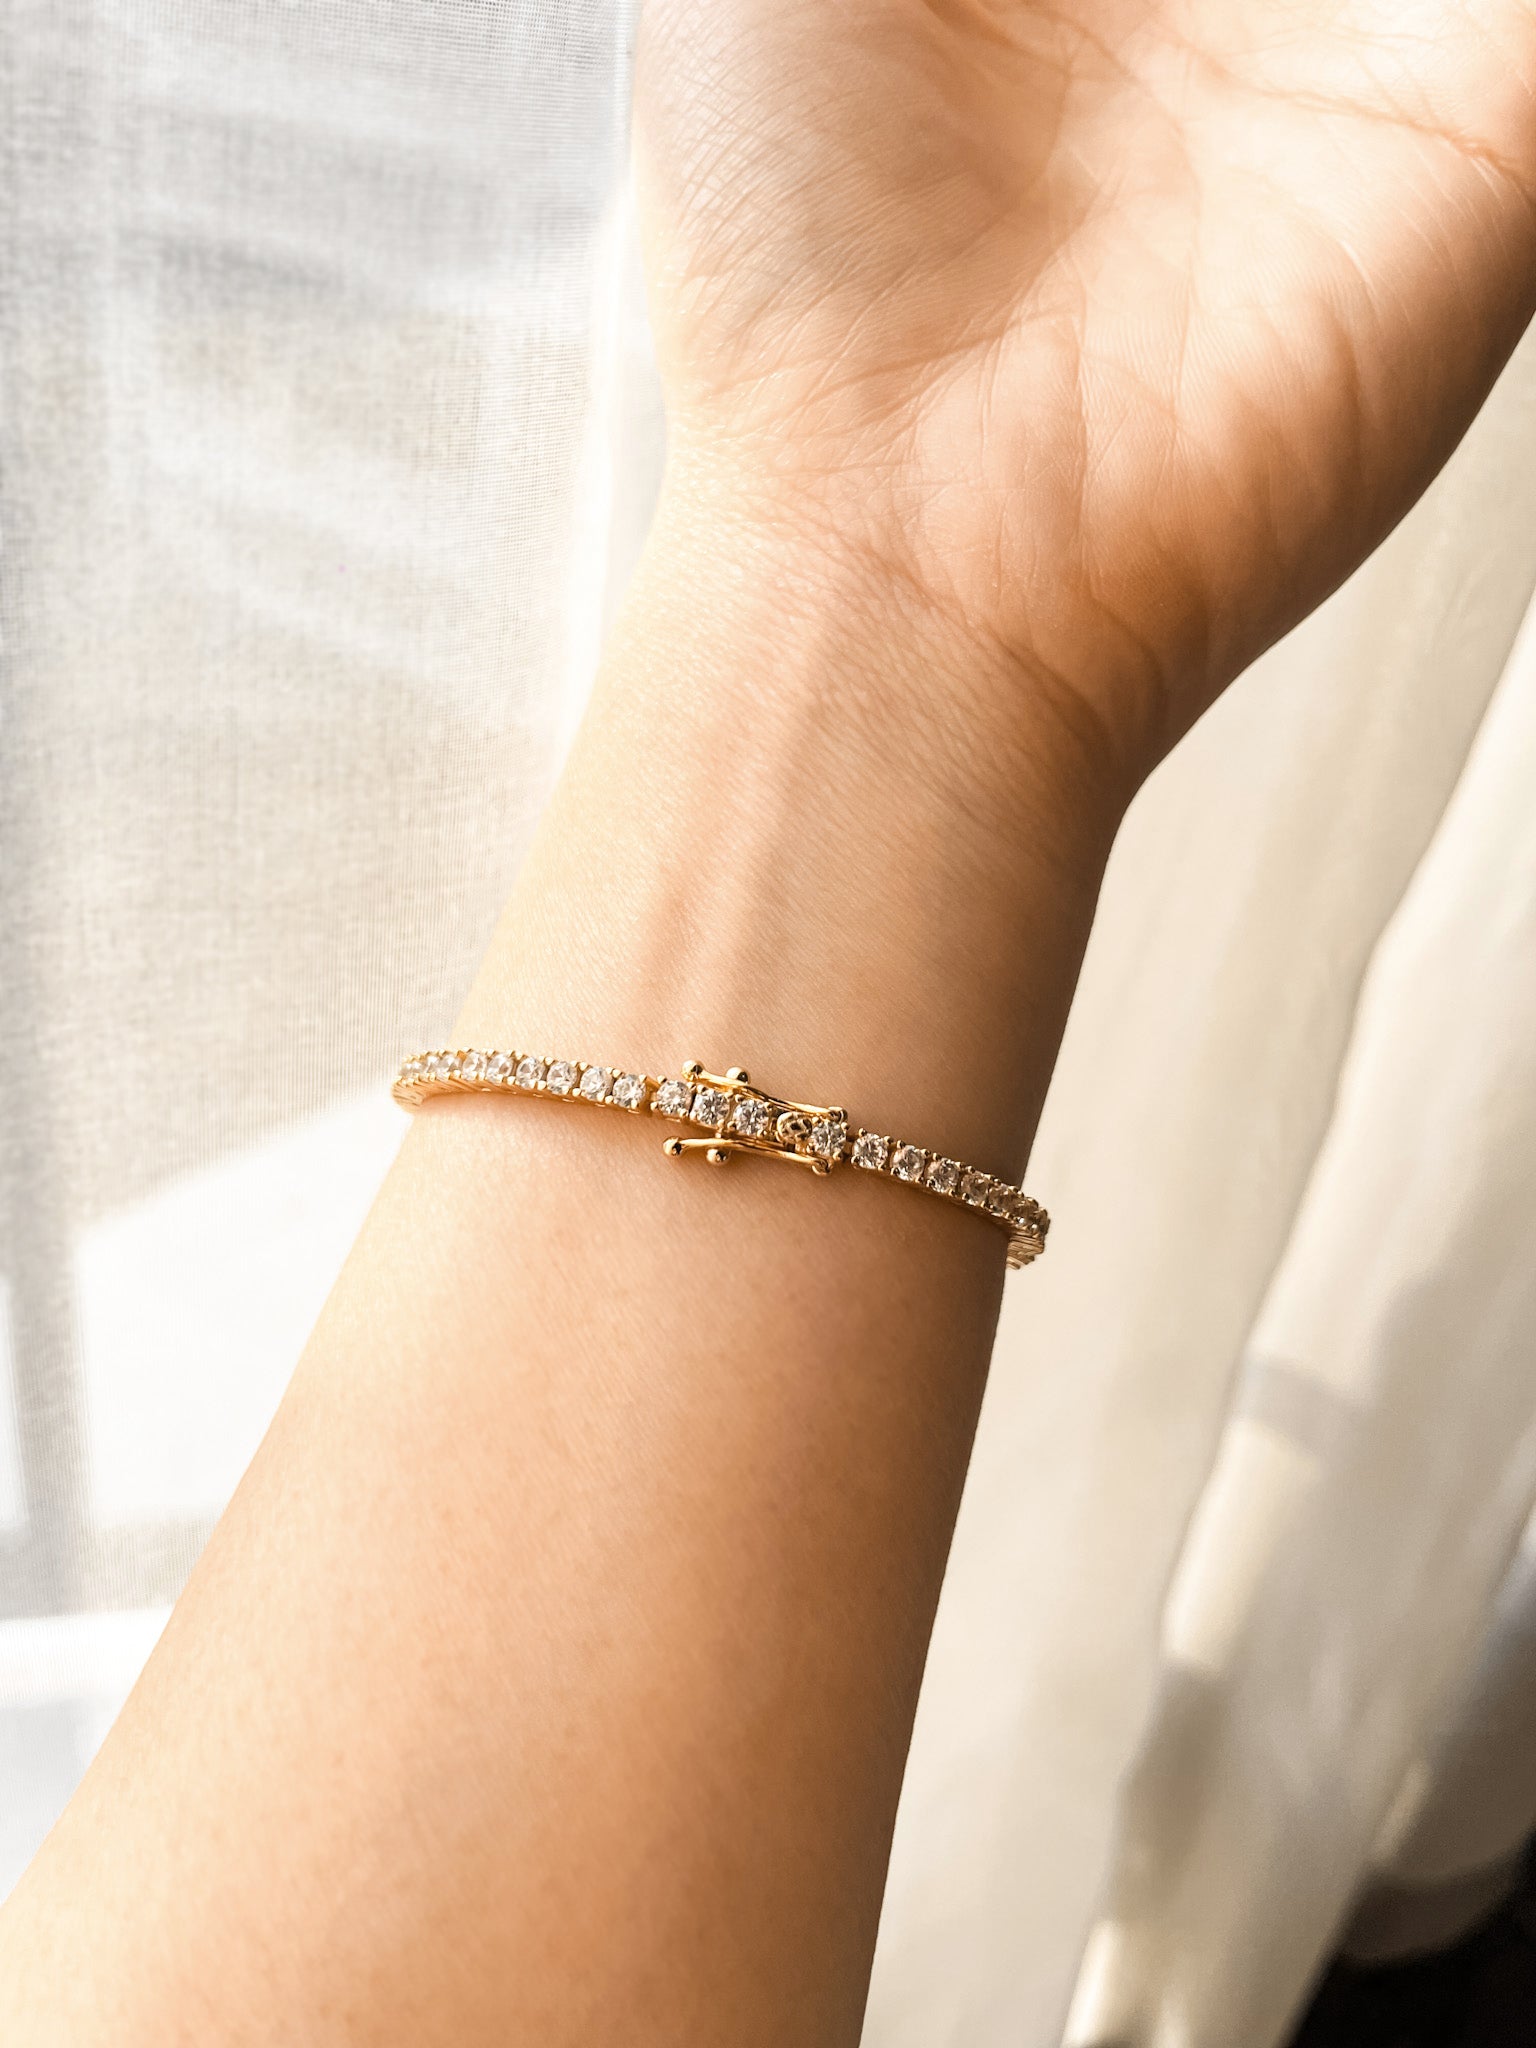 Tender Objects' Lawn Tennis Bracelet - A chic blend of timeless elegance inspired by lush greenery.